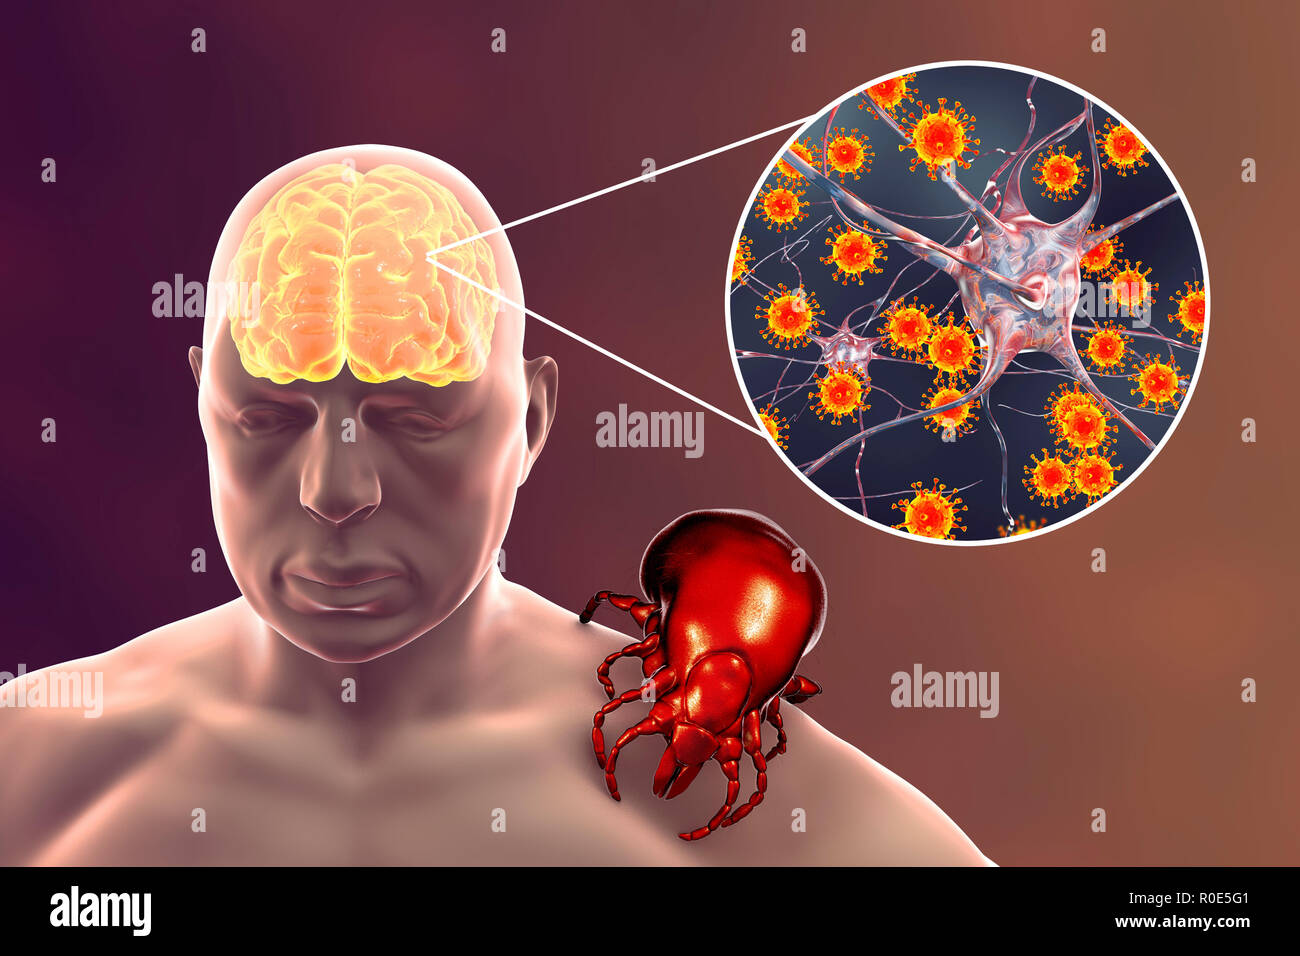 Tick-bourne encephalitis, computer illustration. Tick- borne encephalitis (inflammation of the brain) covers a range of illnesses ranging from a severe paralytic encephalitis, which occurs in Siberia and is transmitted by Ixodes persulcatus, to a less paralytic encephalitis, which is found in central Europe and transmitted by Ixodes ricinus. Agricultural and forestry workers are most frequently affected, as the foci of infection are in and around forest areas, the vertebrate maintenance hosts being rodents and ground-living birds. Stock Photo